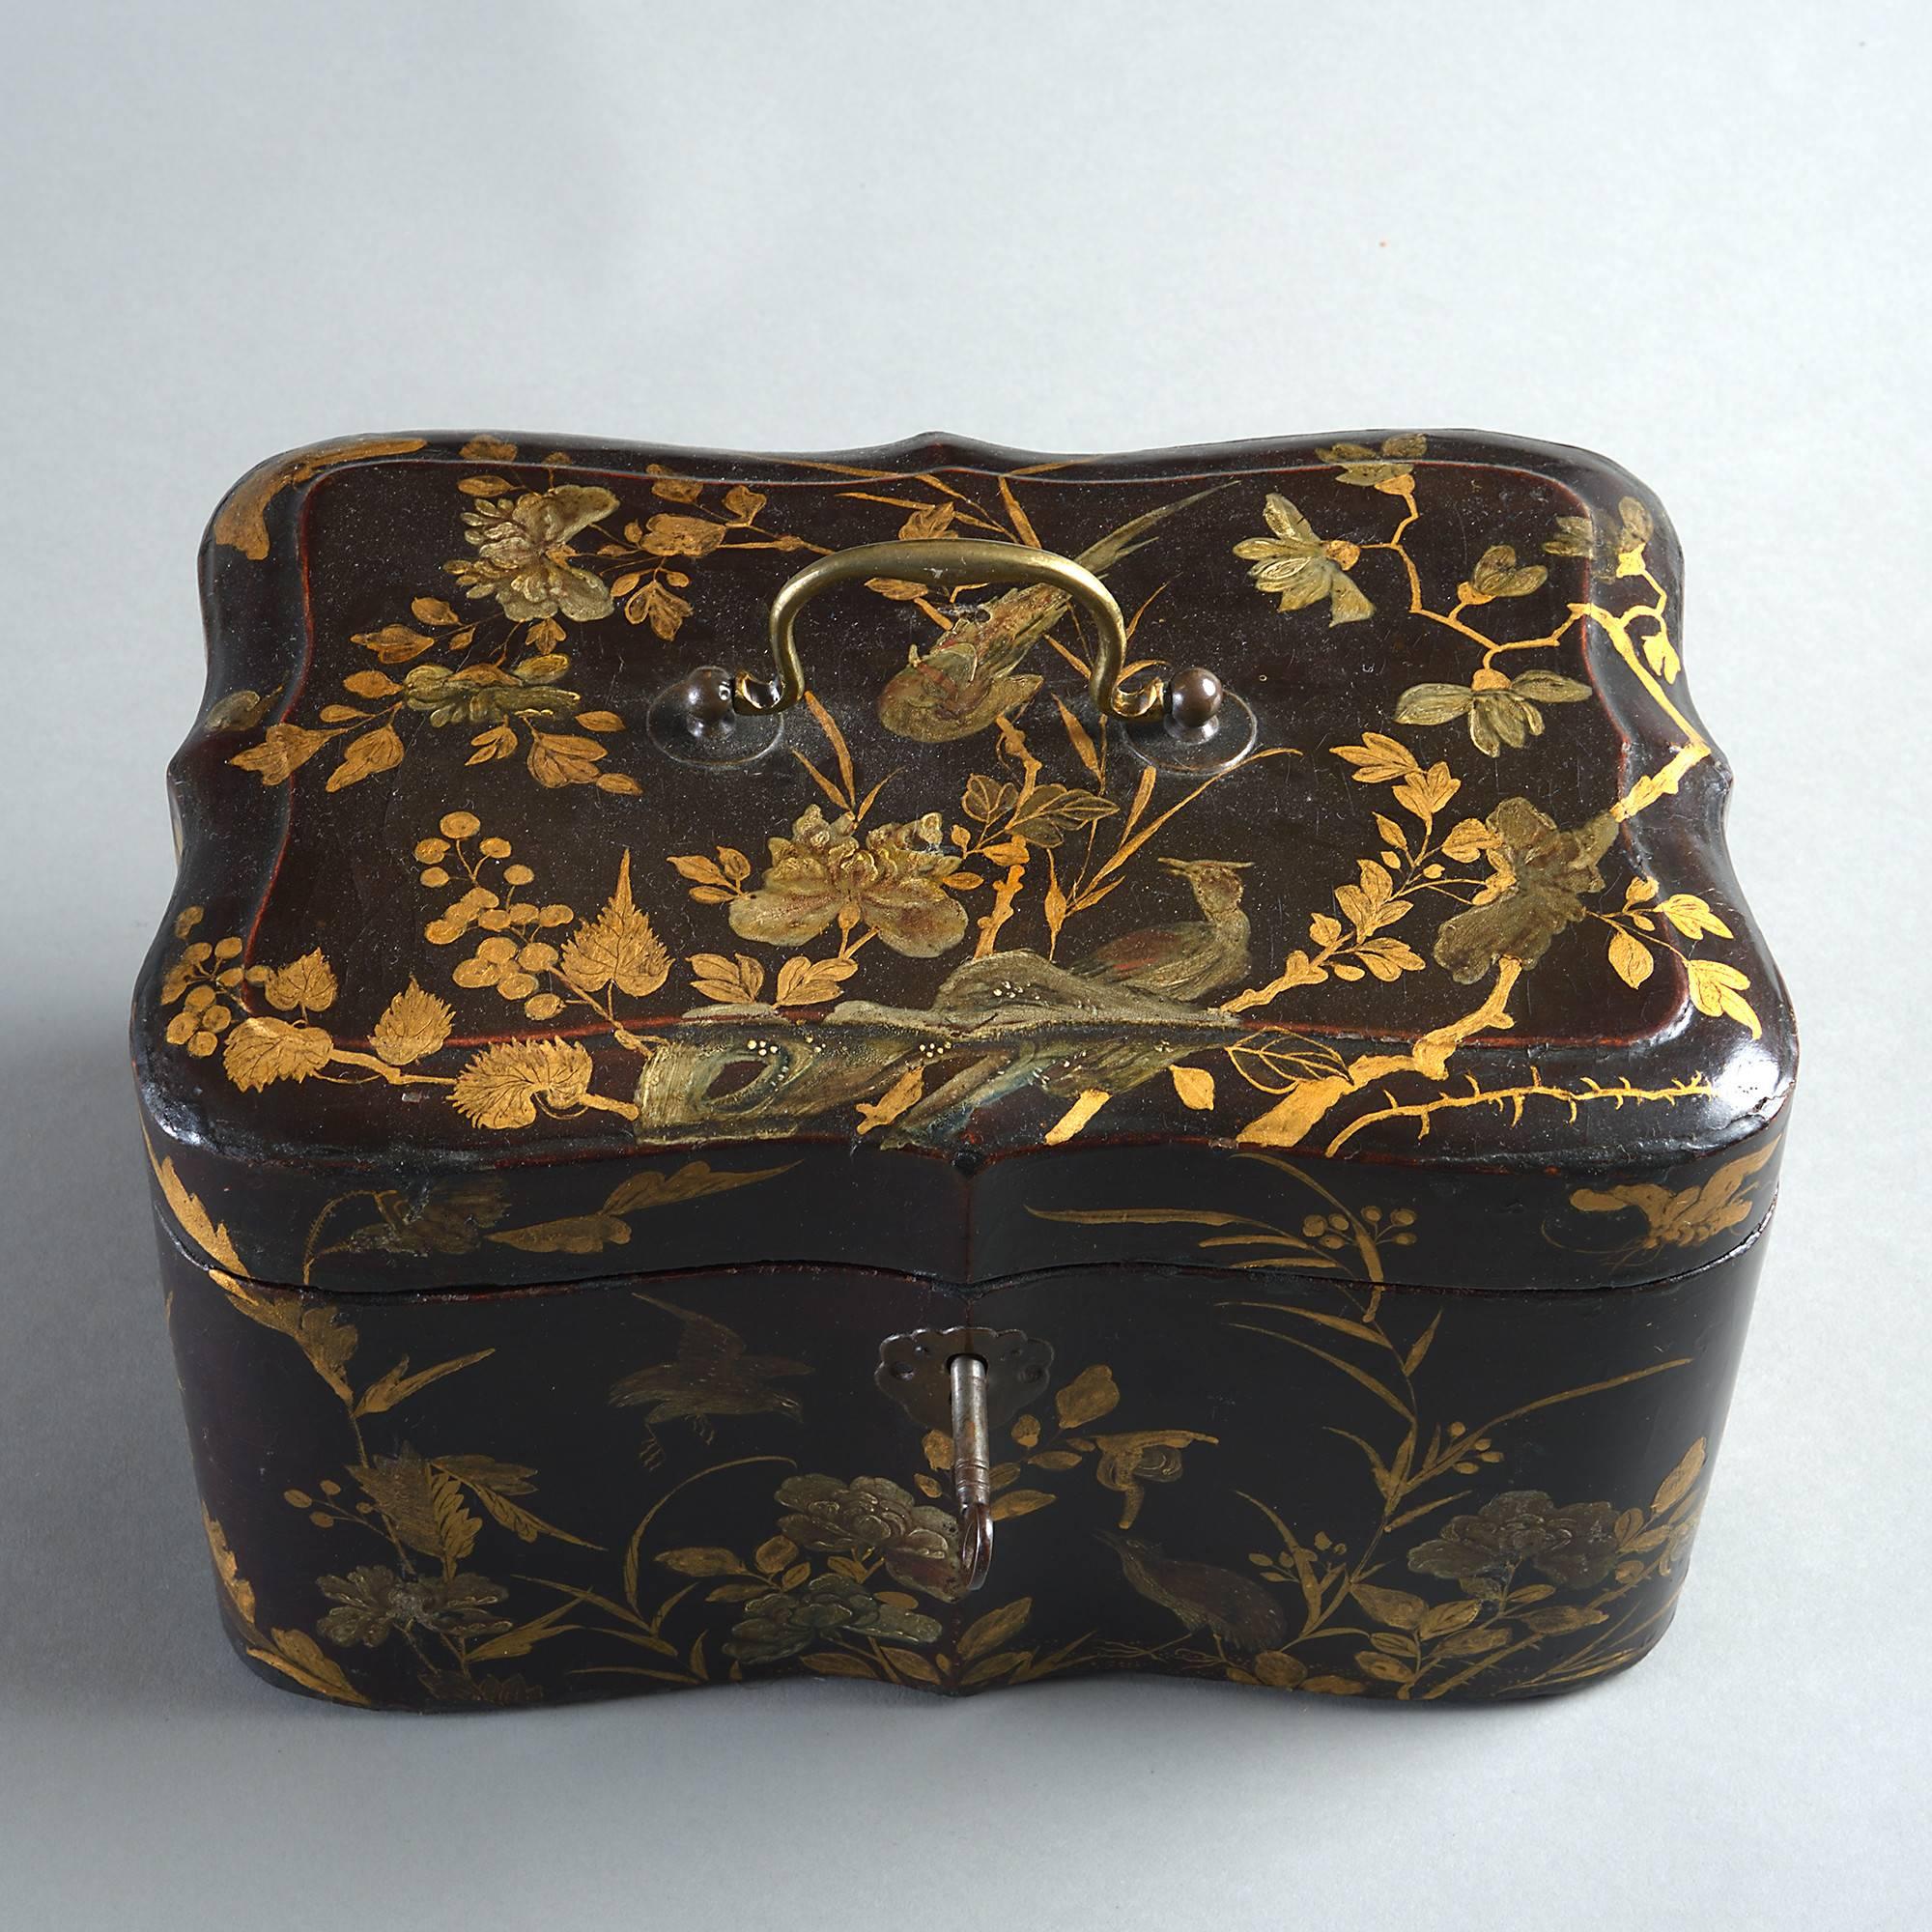 Late 18th Century 18th Century Chinese Export Black Lacquer Casket